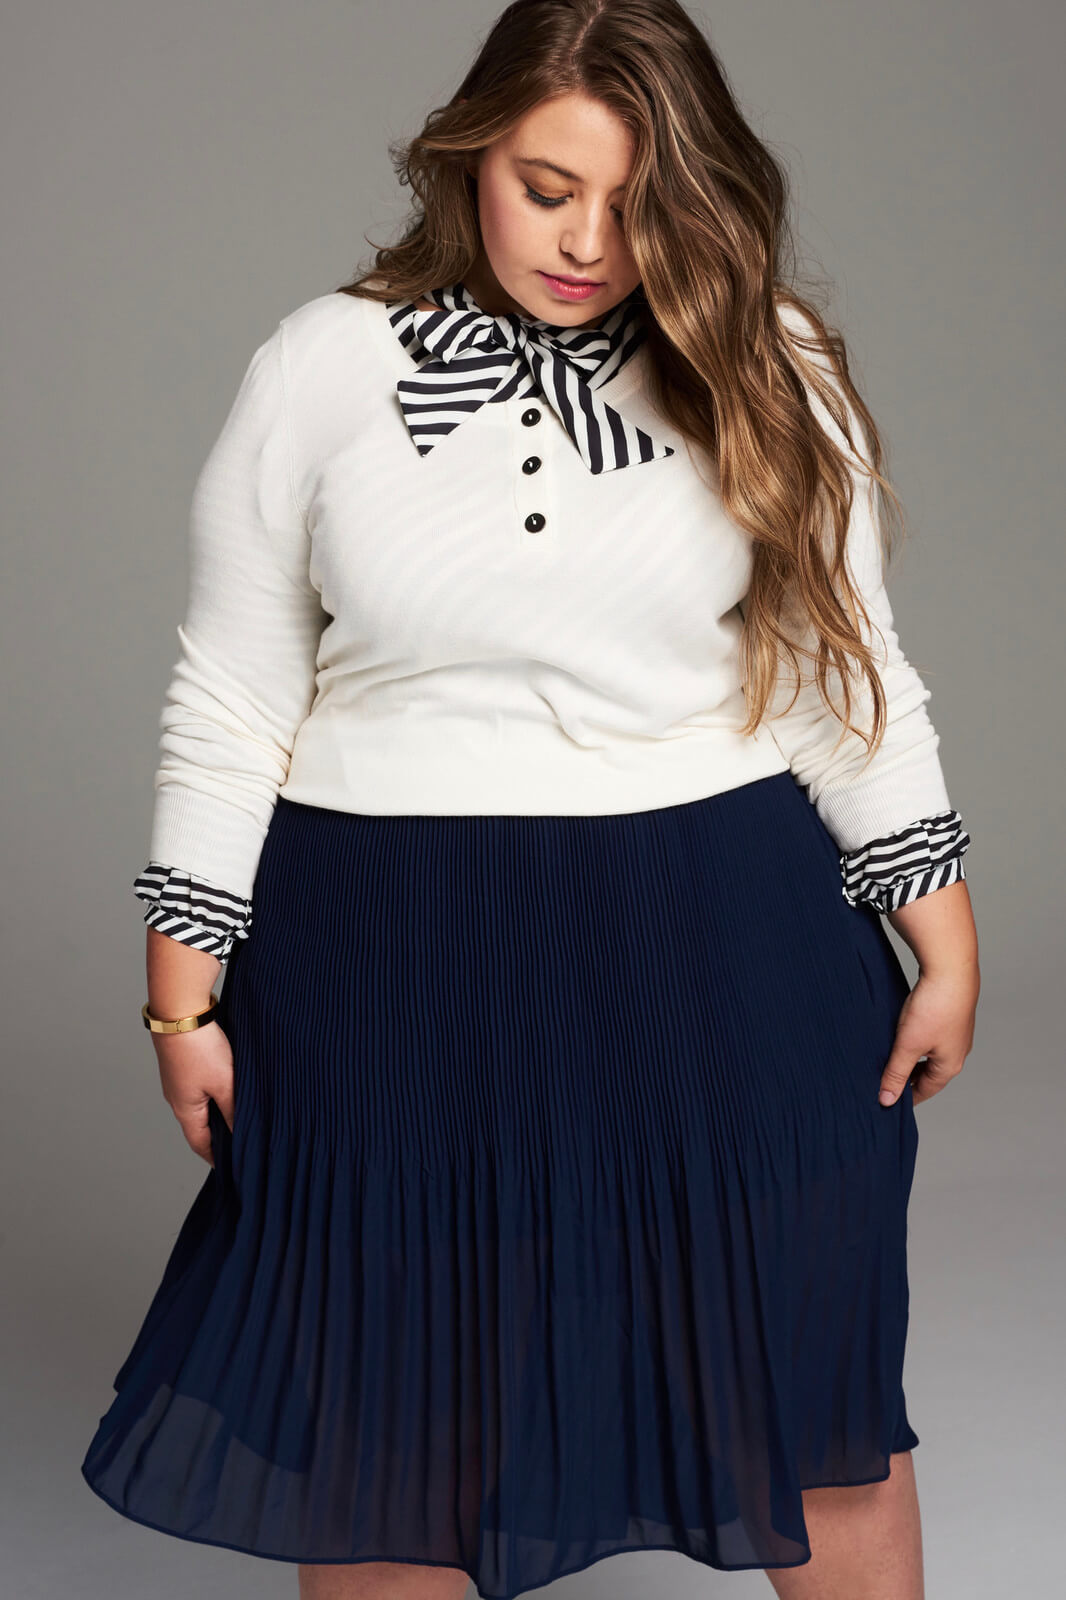 Girl With Curves Fall 2017 Navy Skirt With Strip Blouse Nad White Sweater